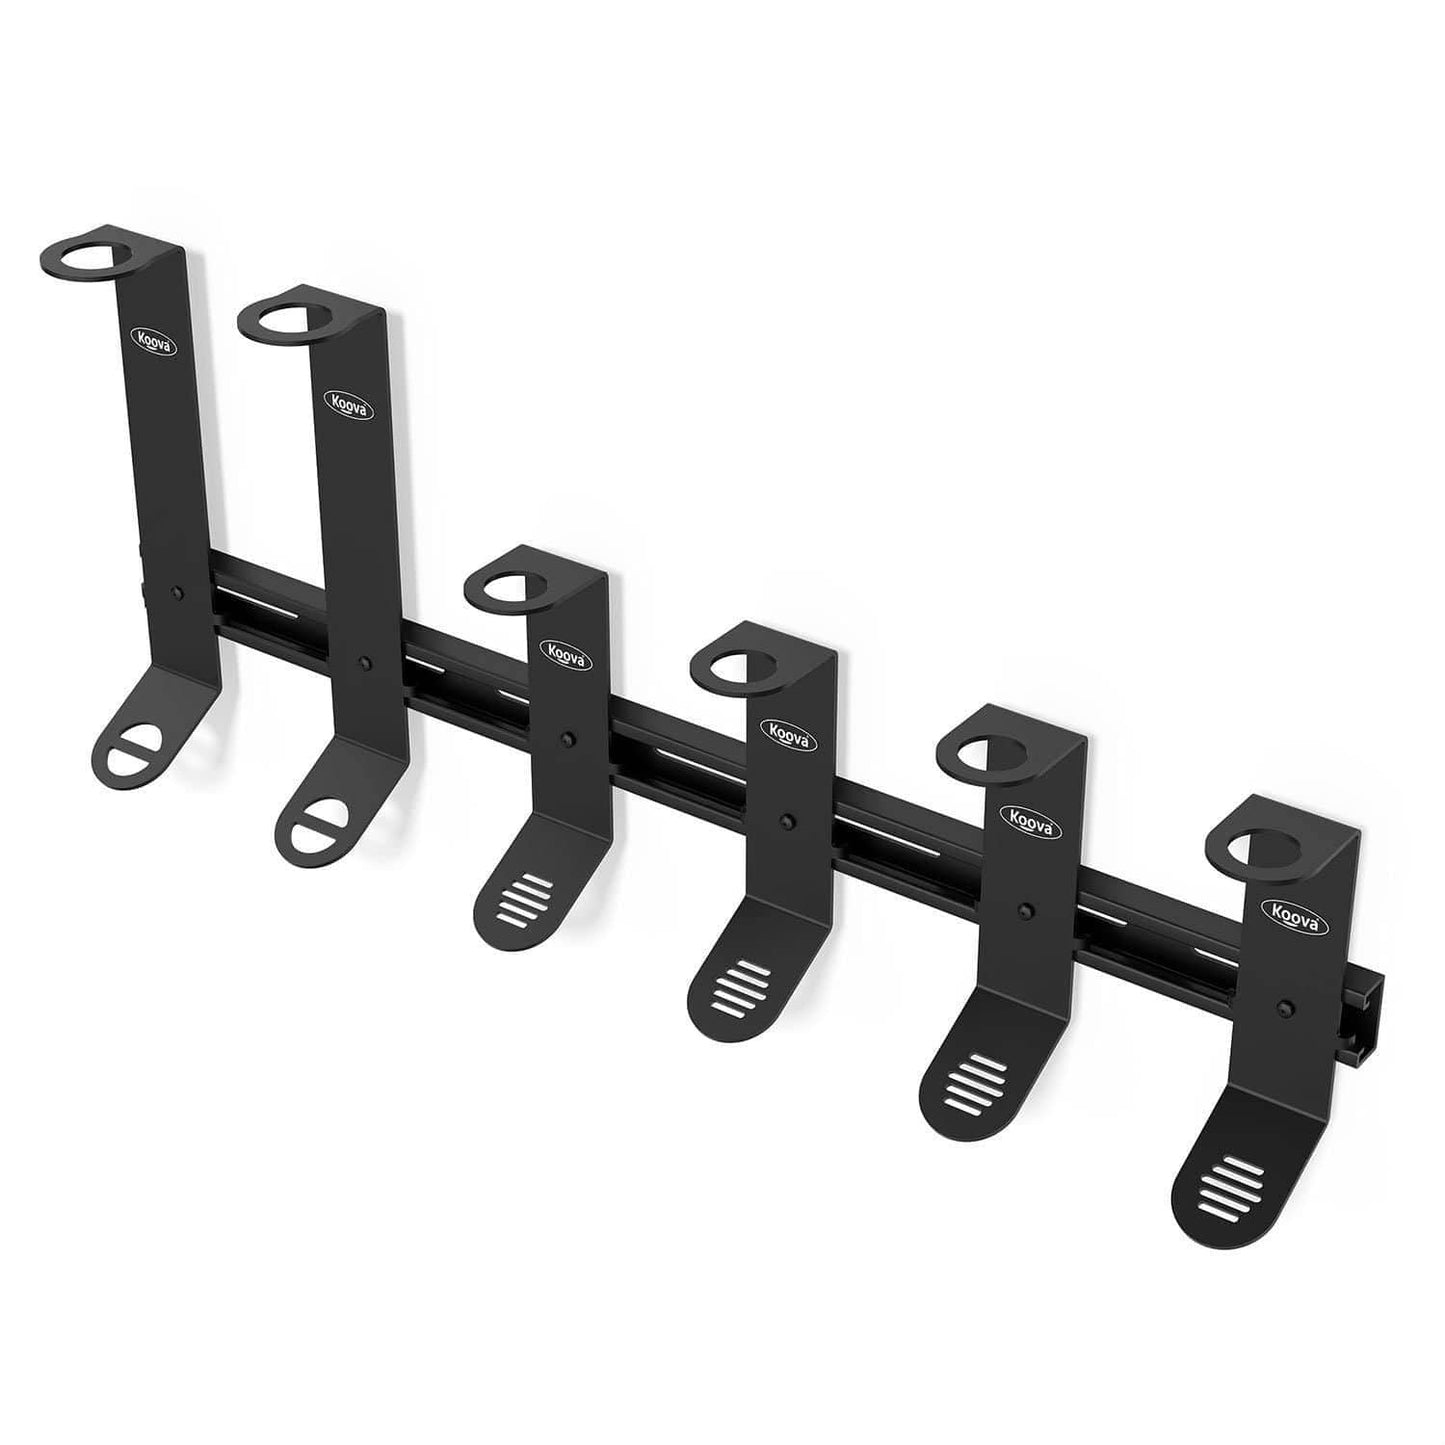 Wall mounted fishing rod rack for spinning and offshore fishing poles